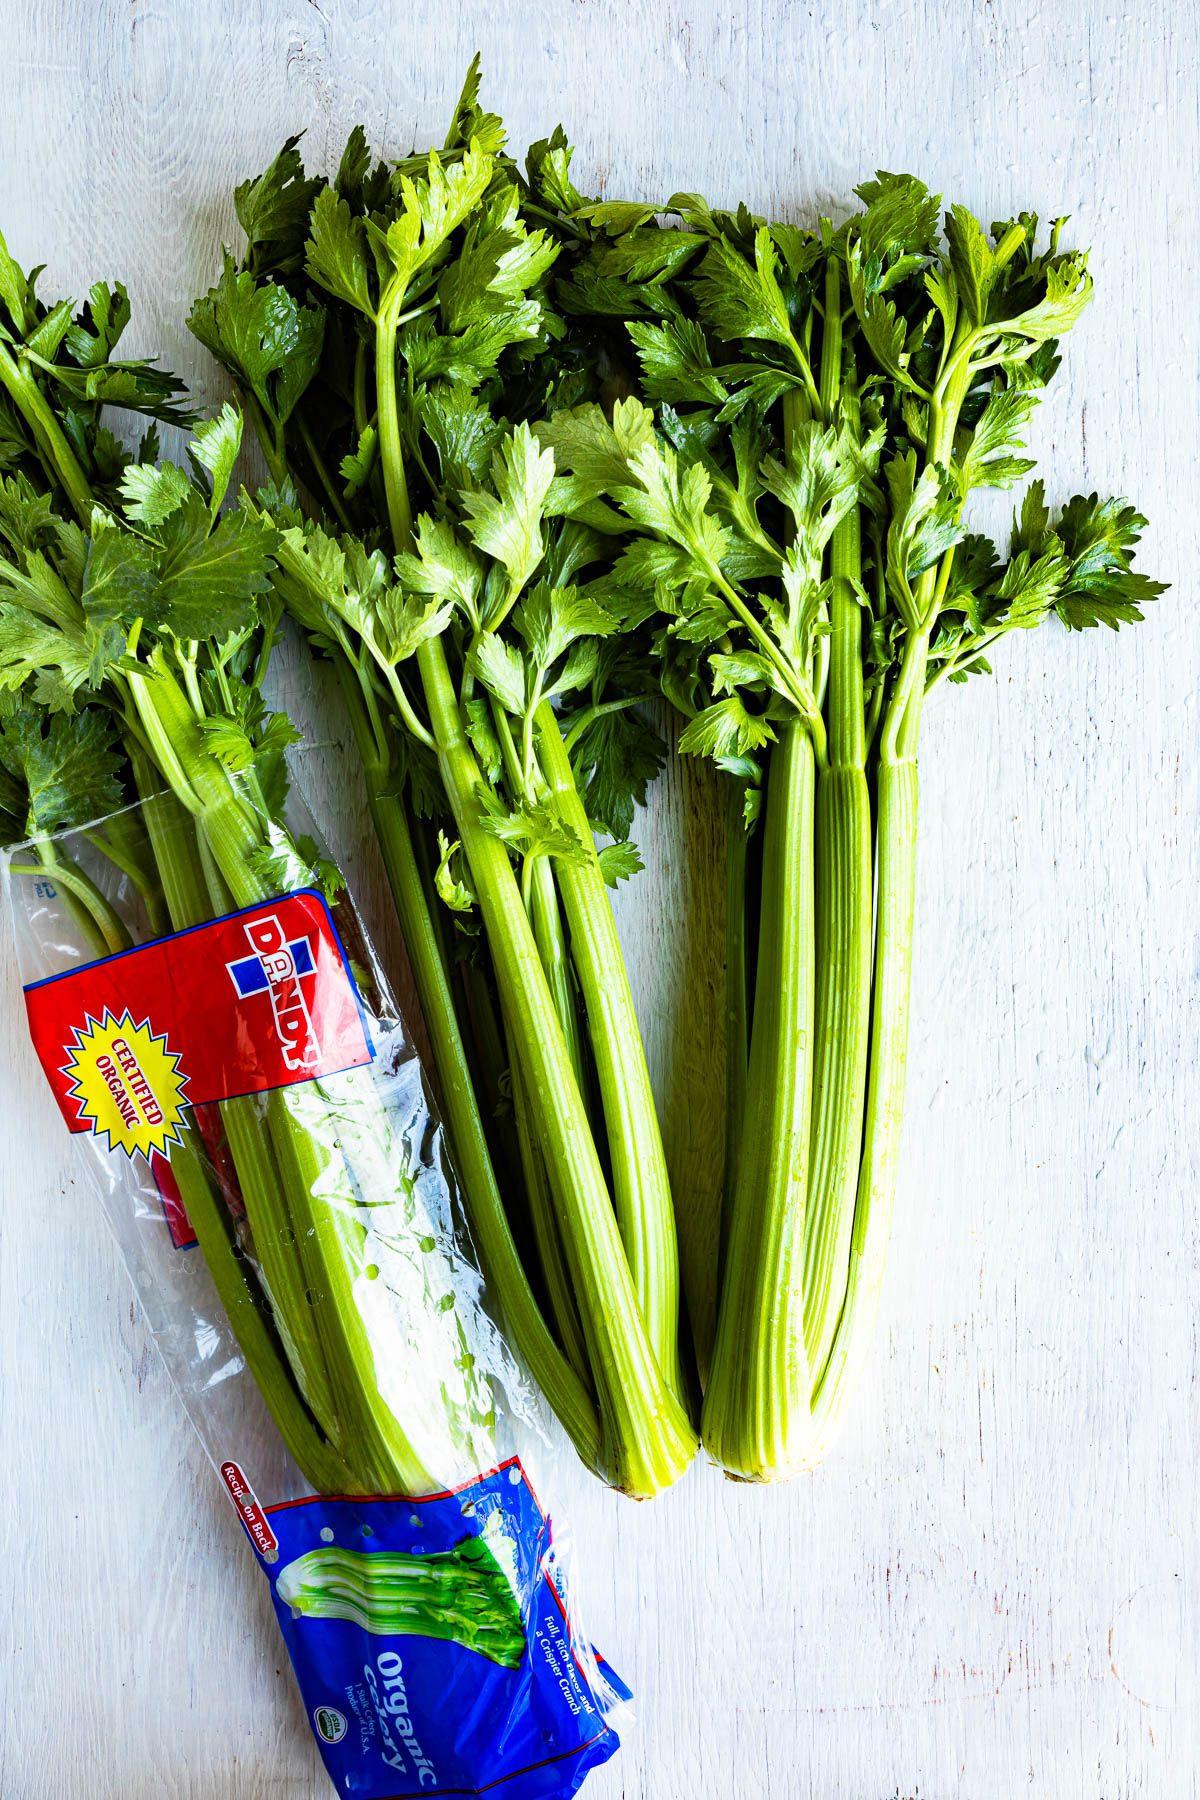 3 heads of celery with leaves, one in a bag with the words Dandy on it.